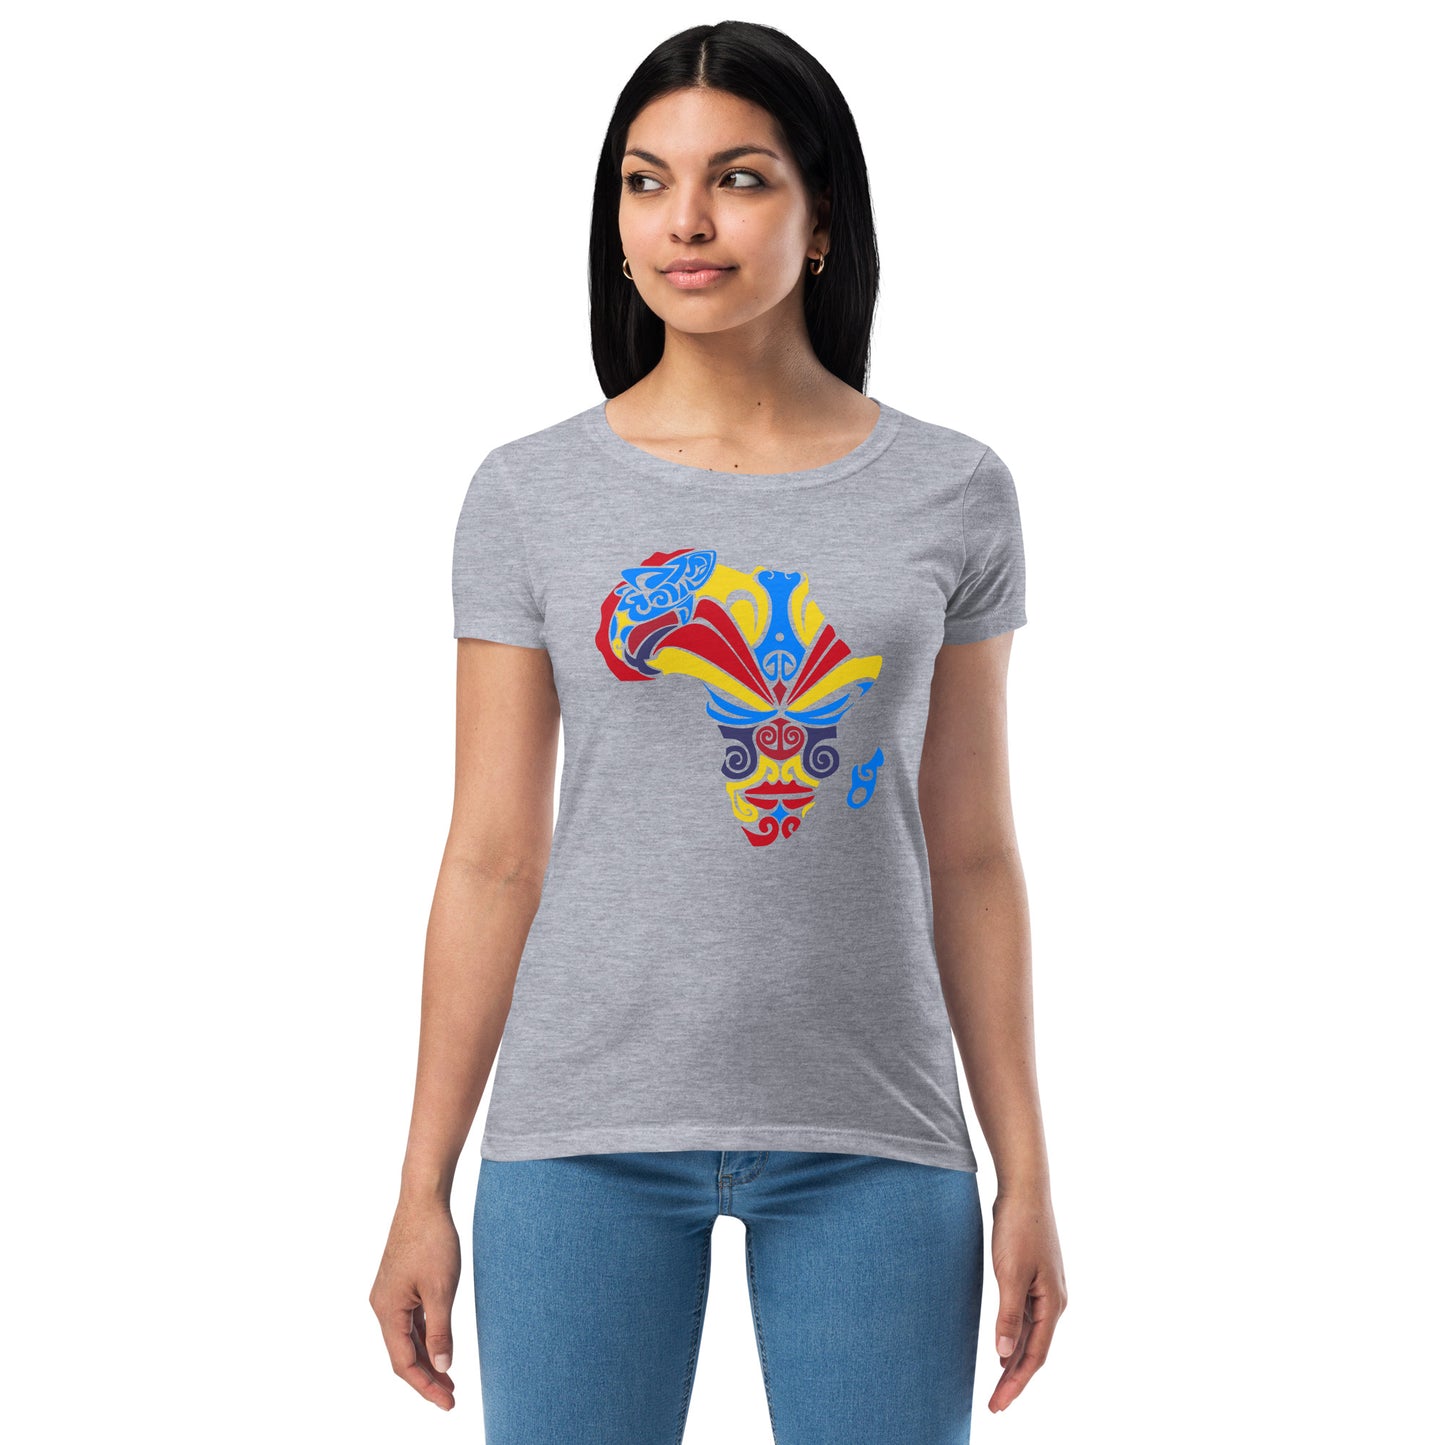 Women’s Fitted T-shirt - Banamerica Collection